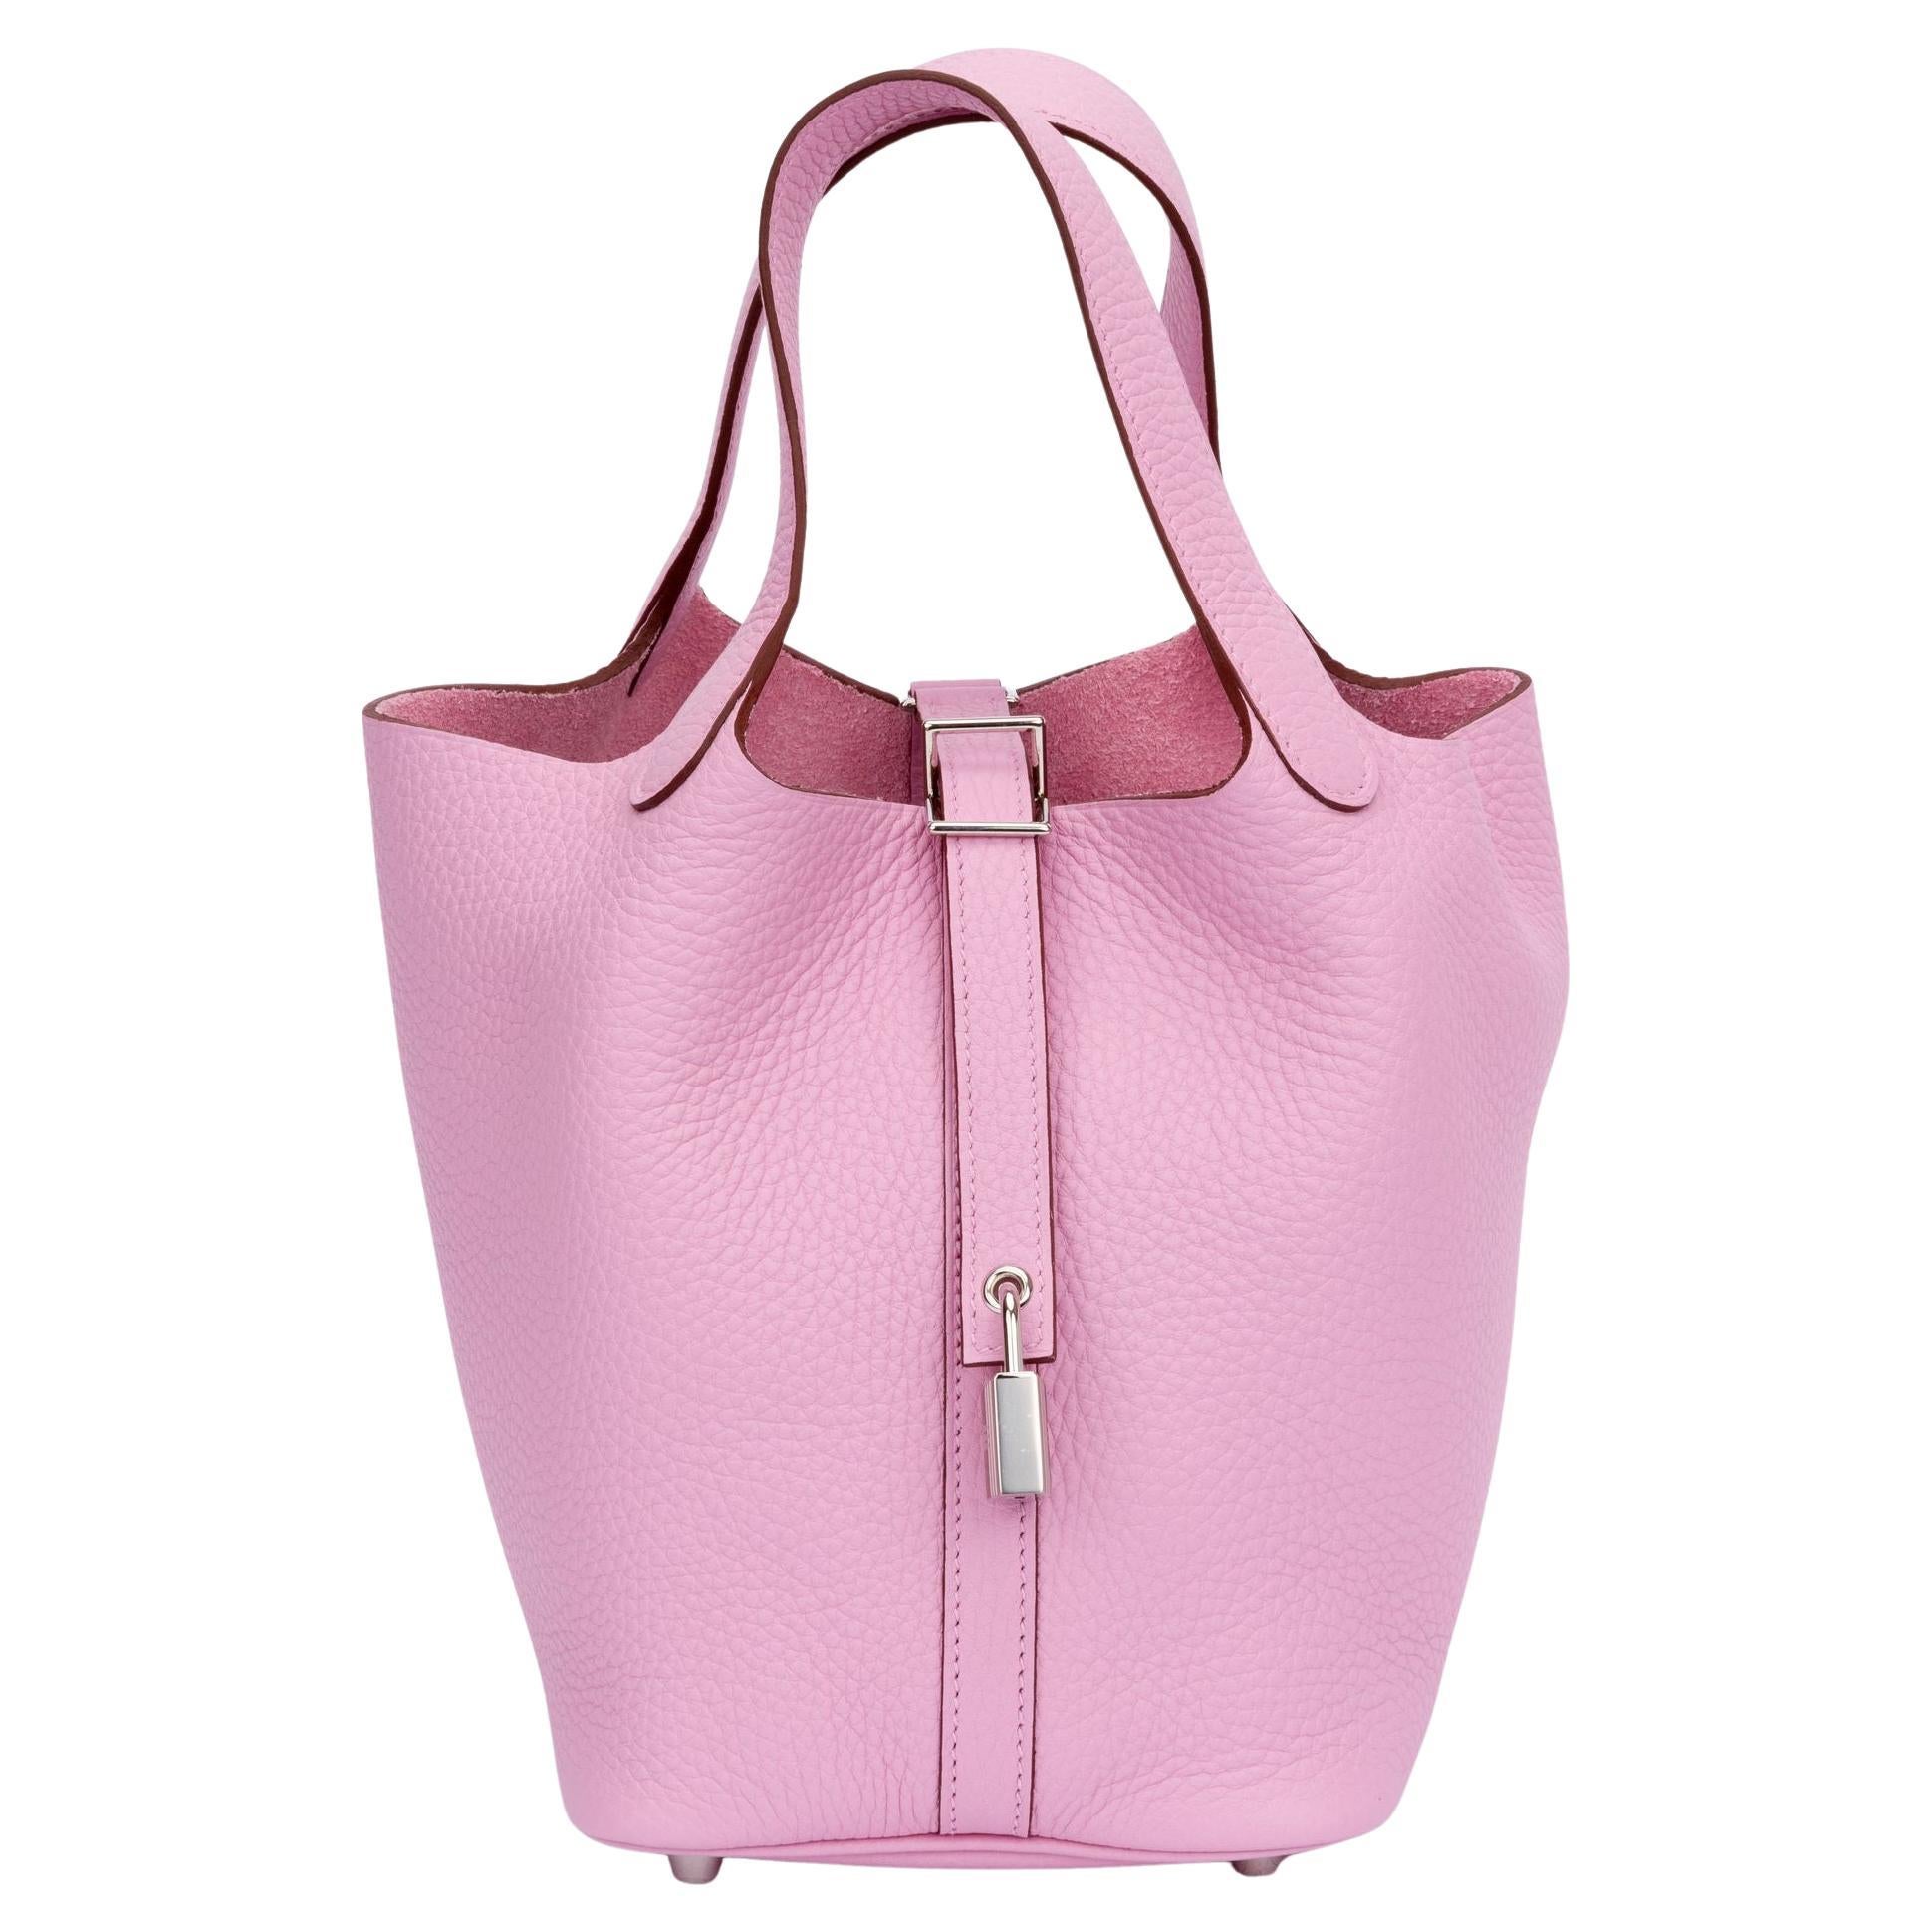 HERMES Taurillon Clemence Tri-Color Picotin Lock 18 PM Rose Extreme Rose  Mexico Rouge De Coeur 1129971